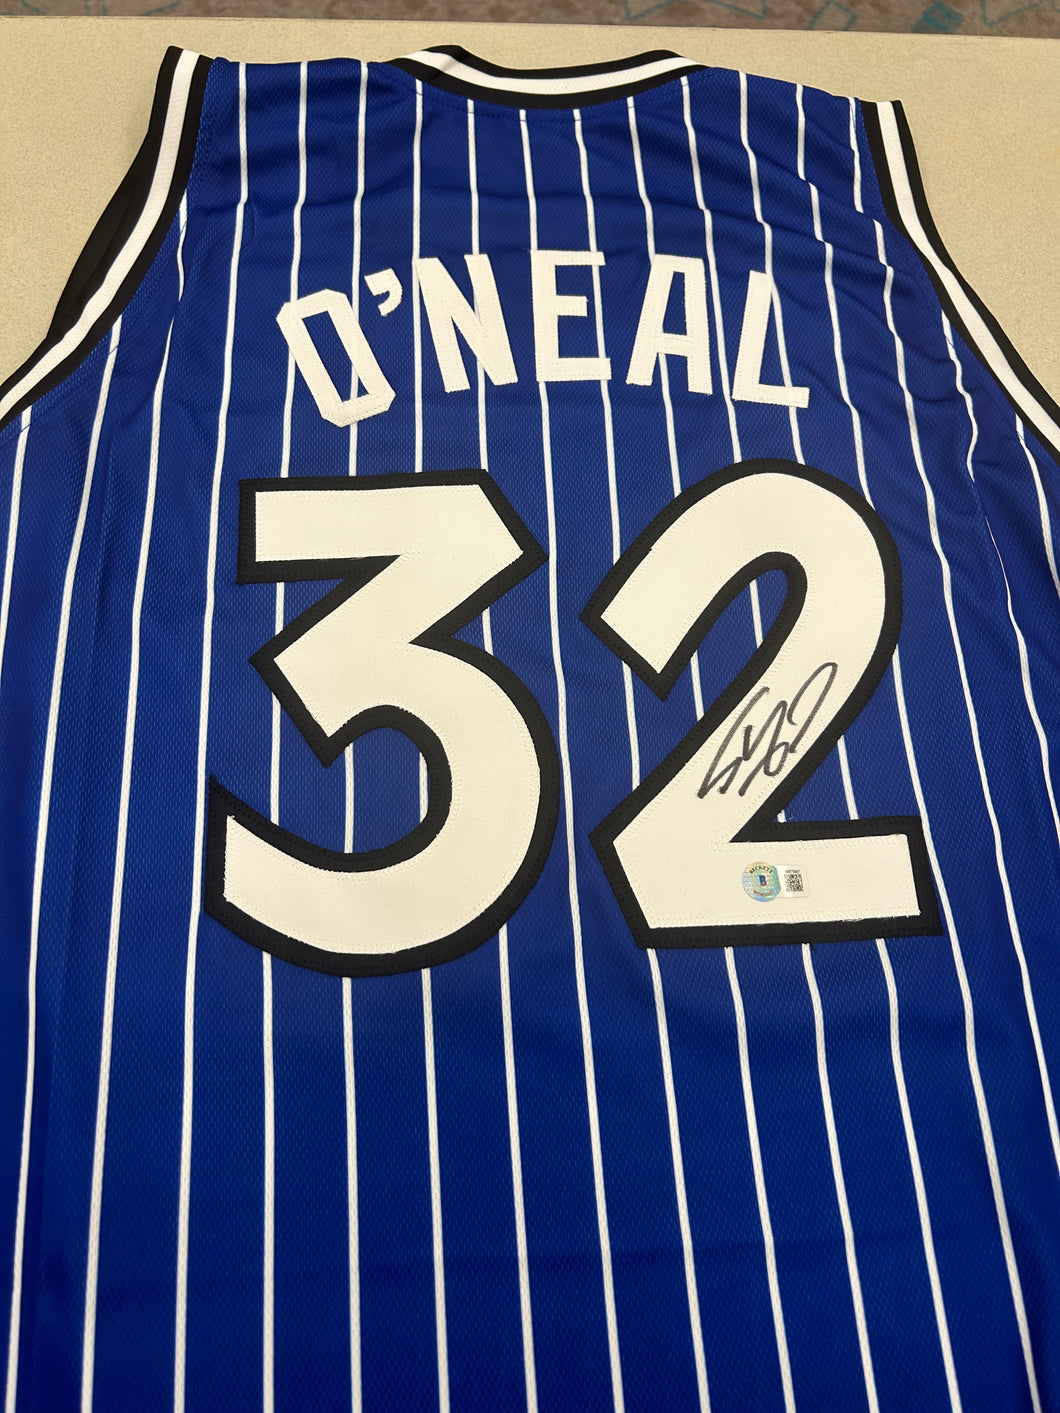 Shaquille O’Neal signed custom Majic jersey